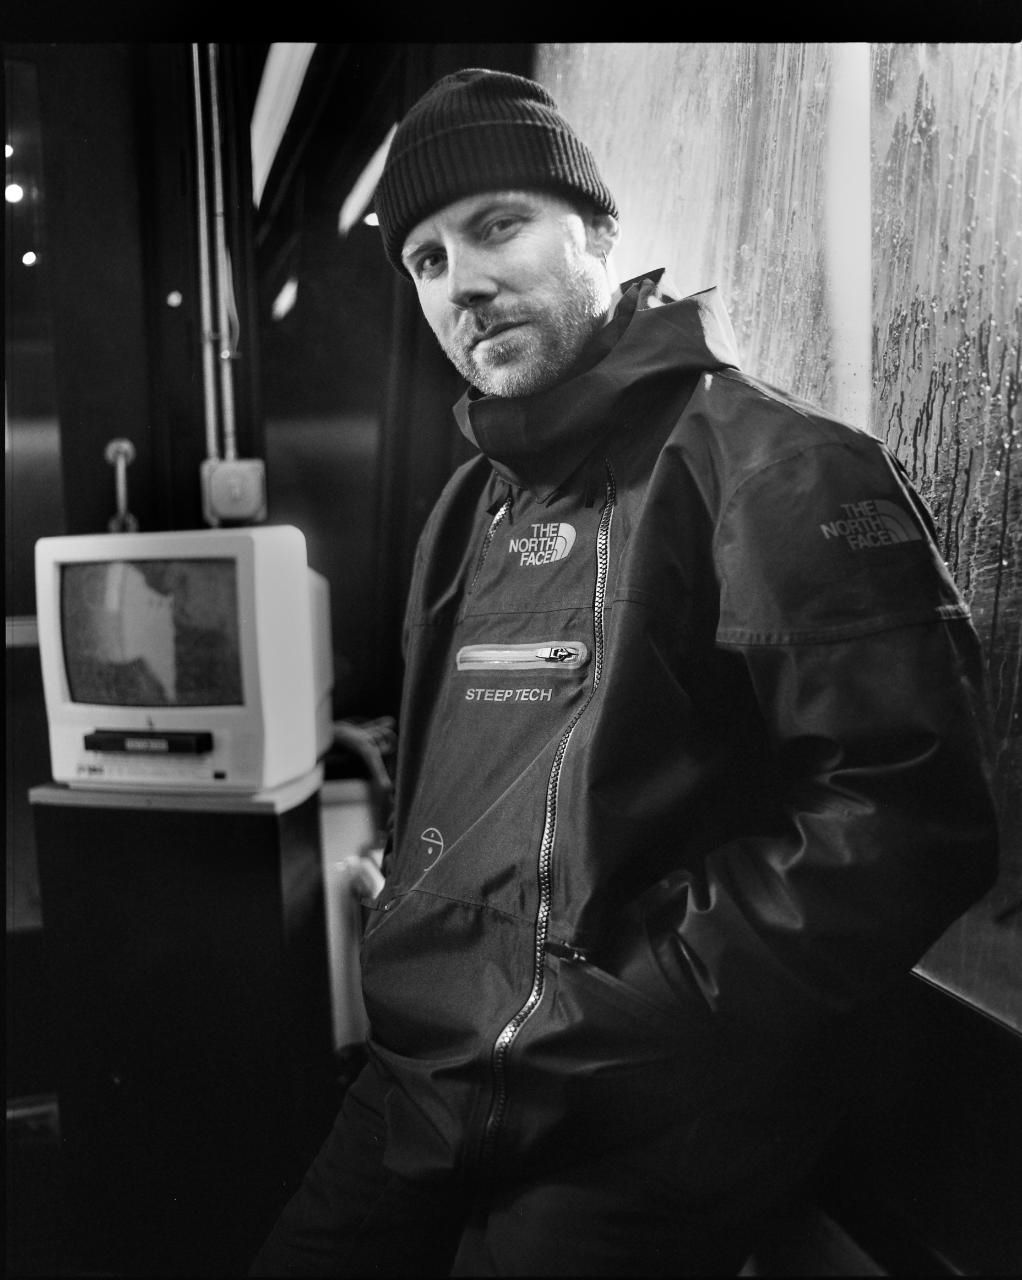 Man in a beanie and North Face jacket leaning against a wall with a vintage TV in the background